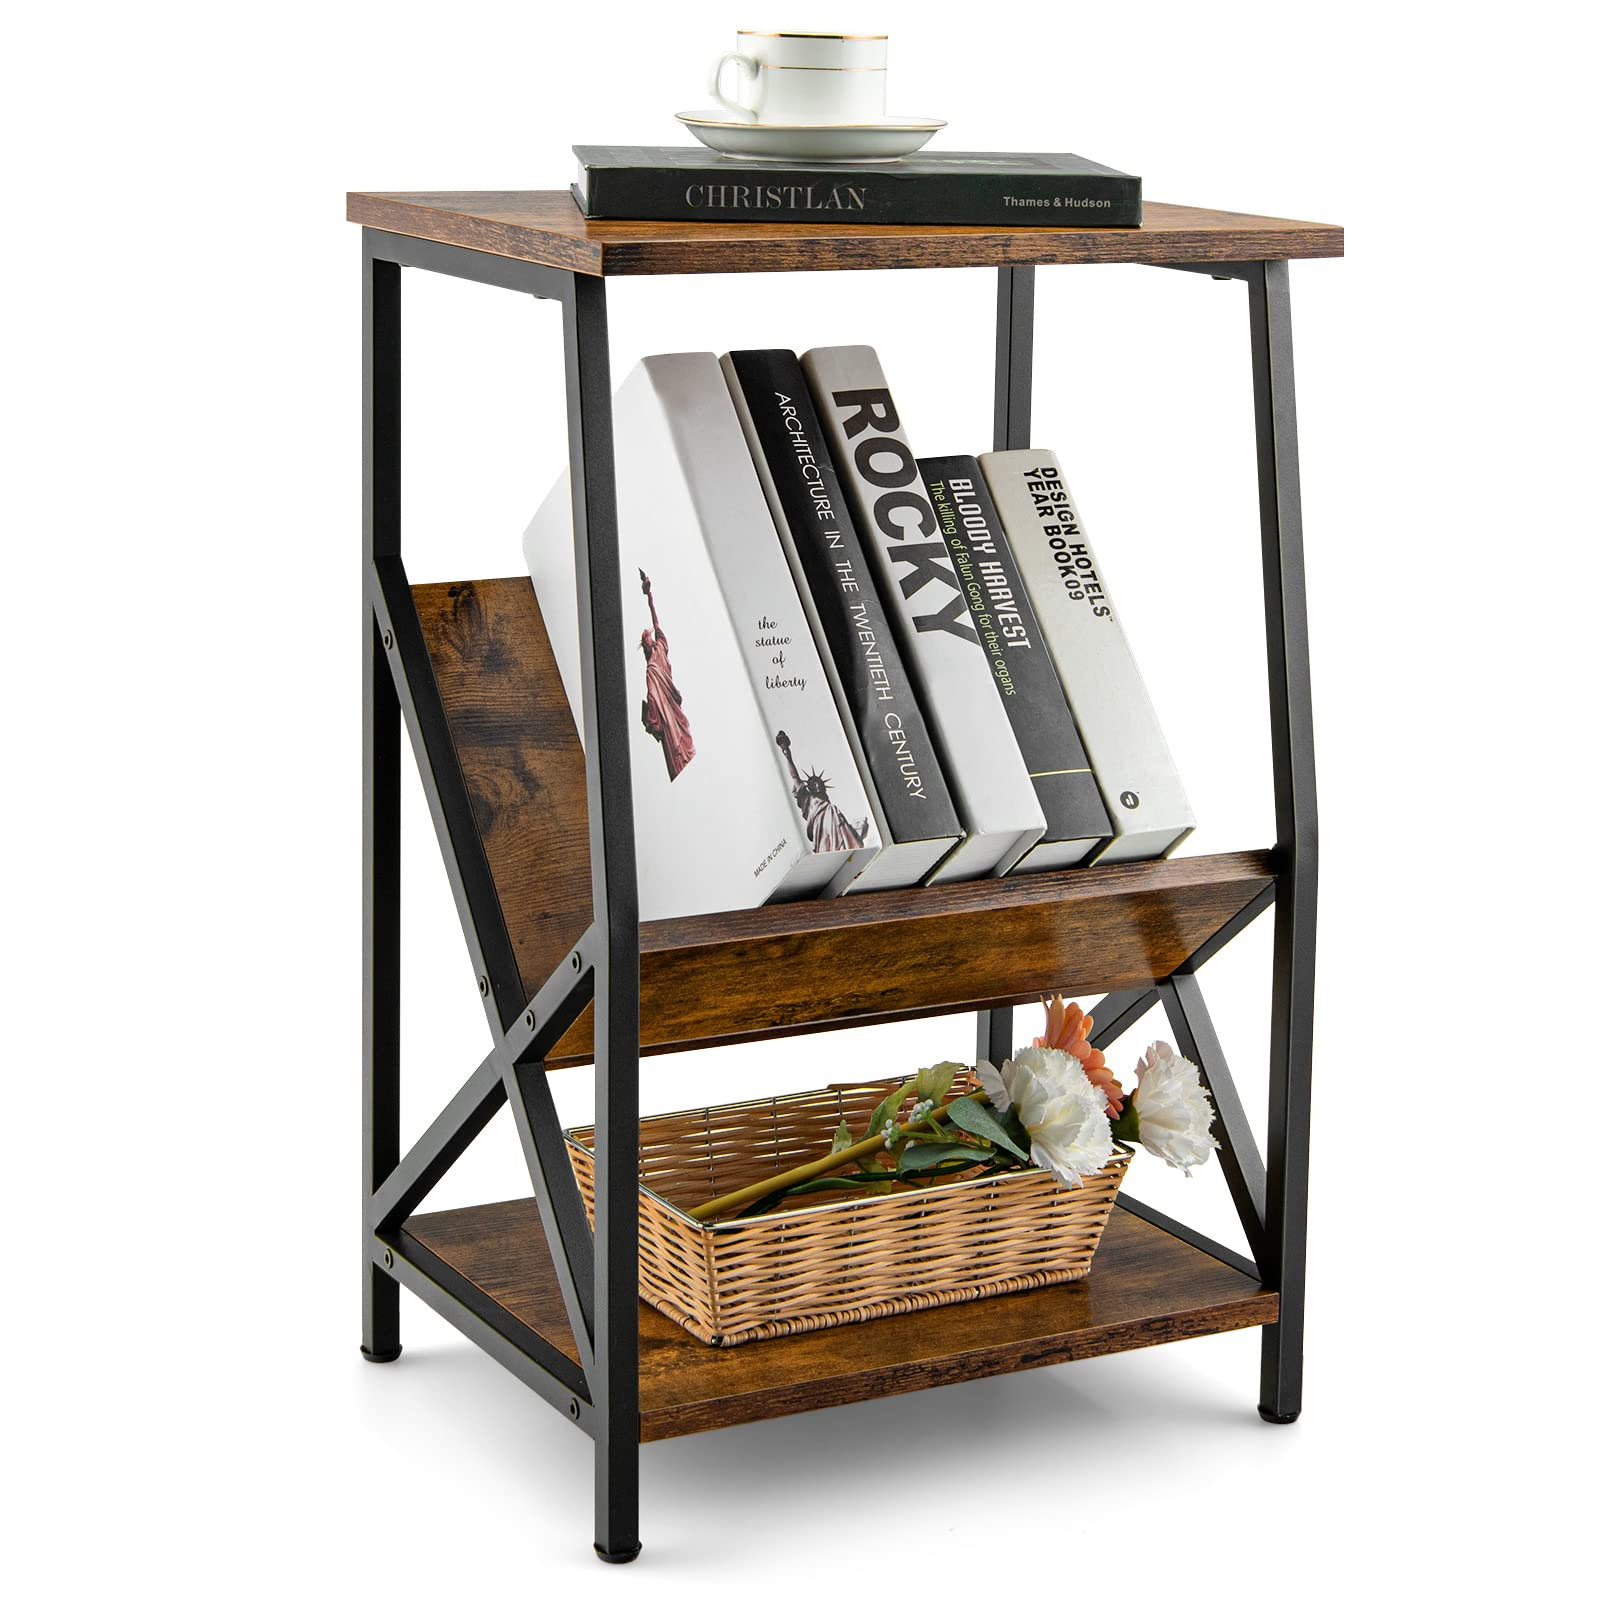 3-Tier End Table, Industrial Side Table w/Storage Rack